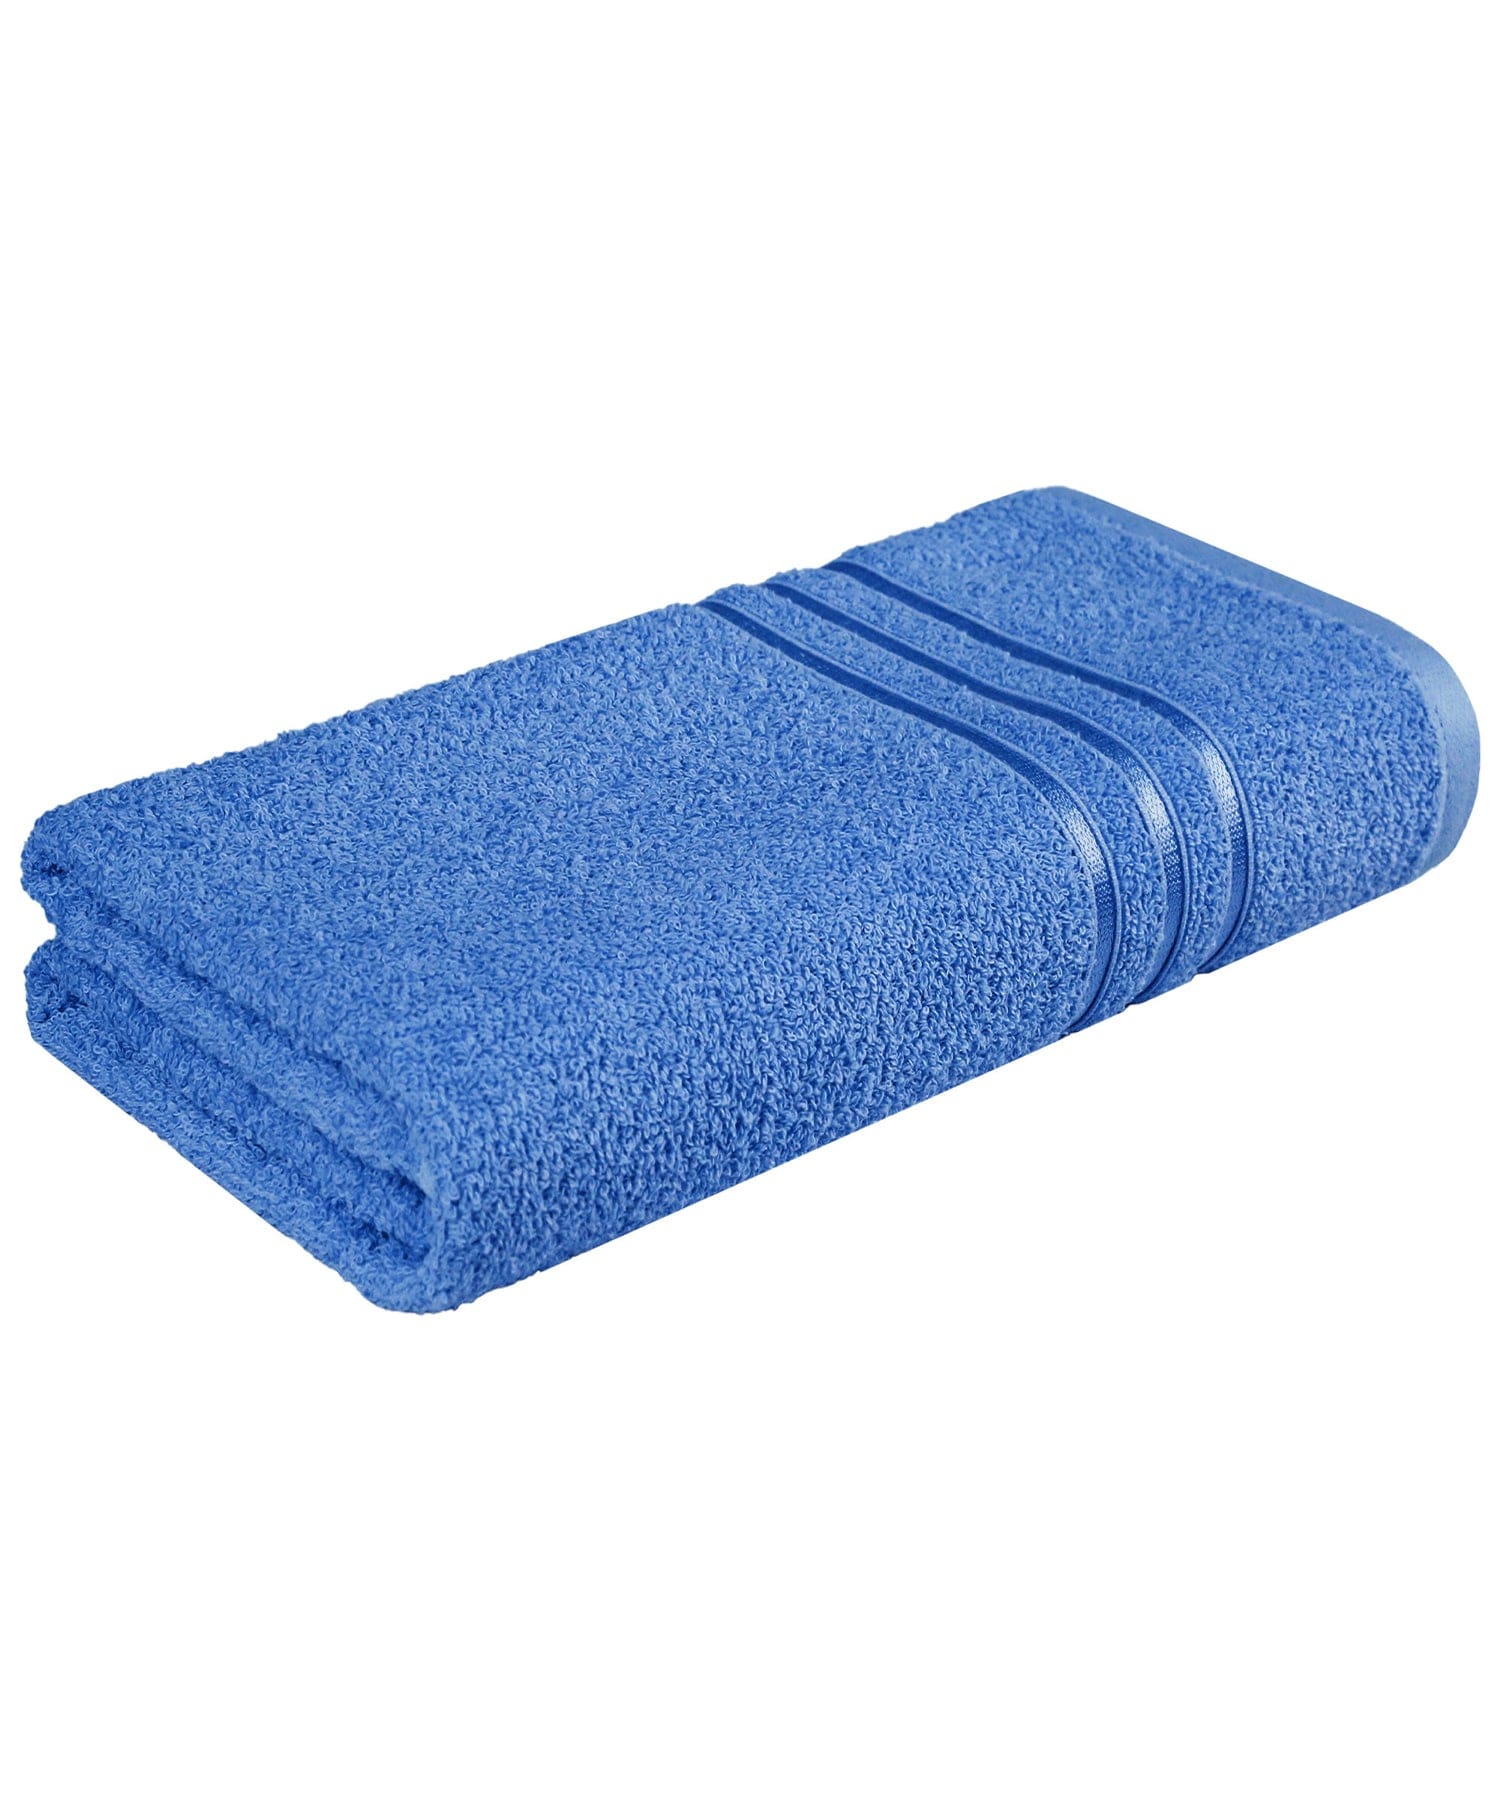 COMFORT LIVING TOWELS,100% Cotton,Quicky Dry,Light Weight, OCEAN BLUE